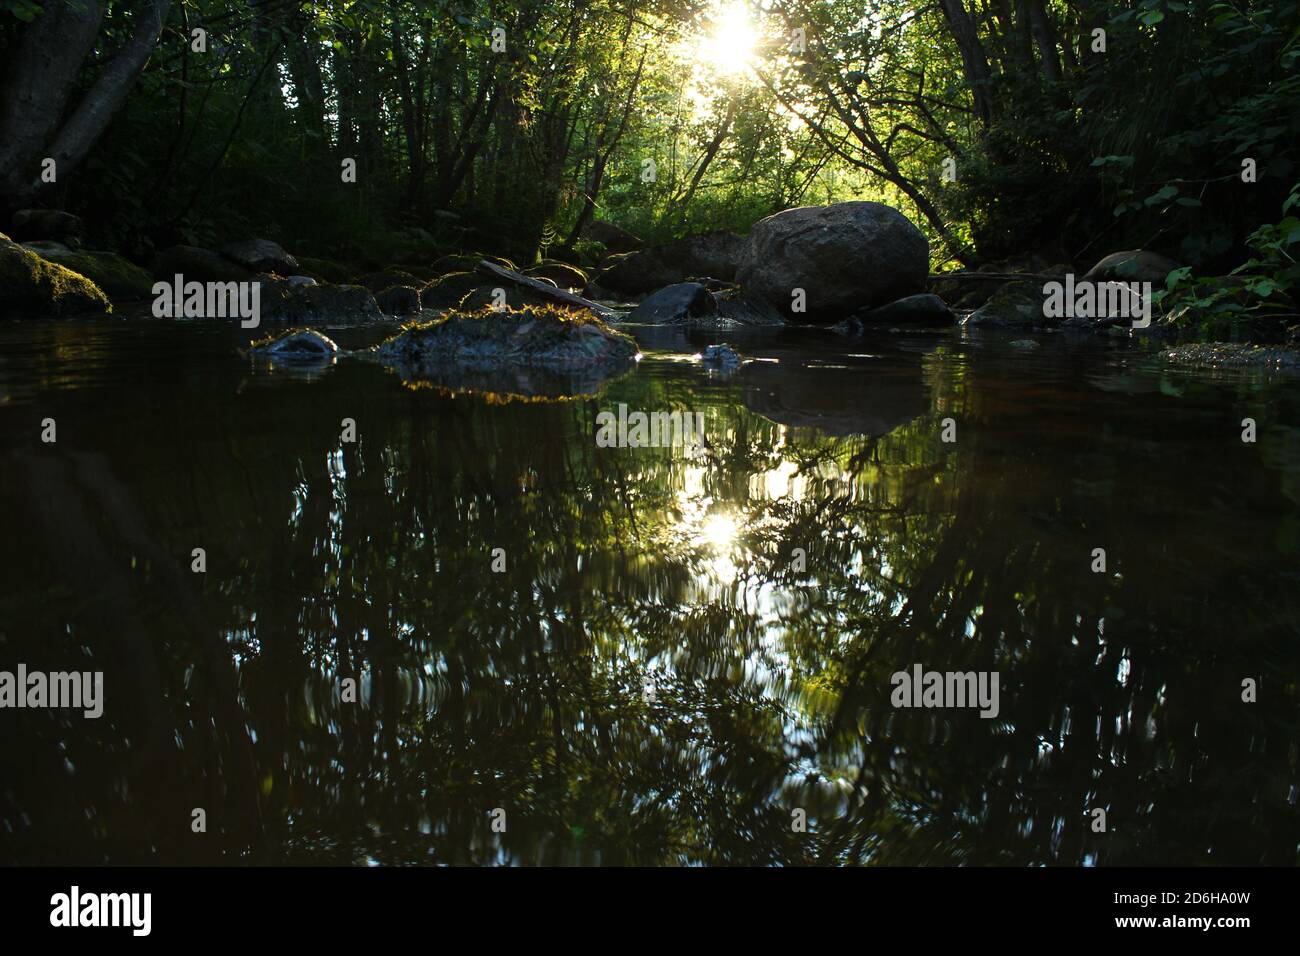 Brook seen at the water level with stones and reflection of the trees Stock Photo